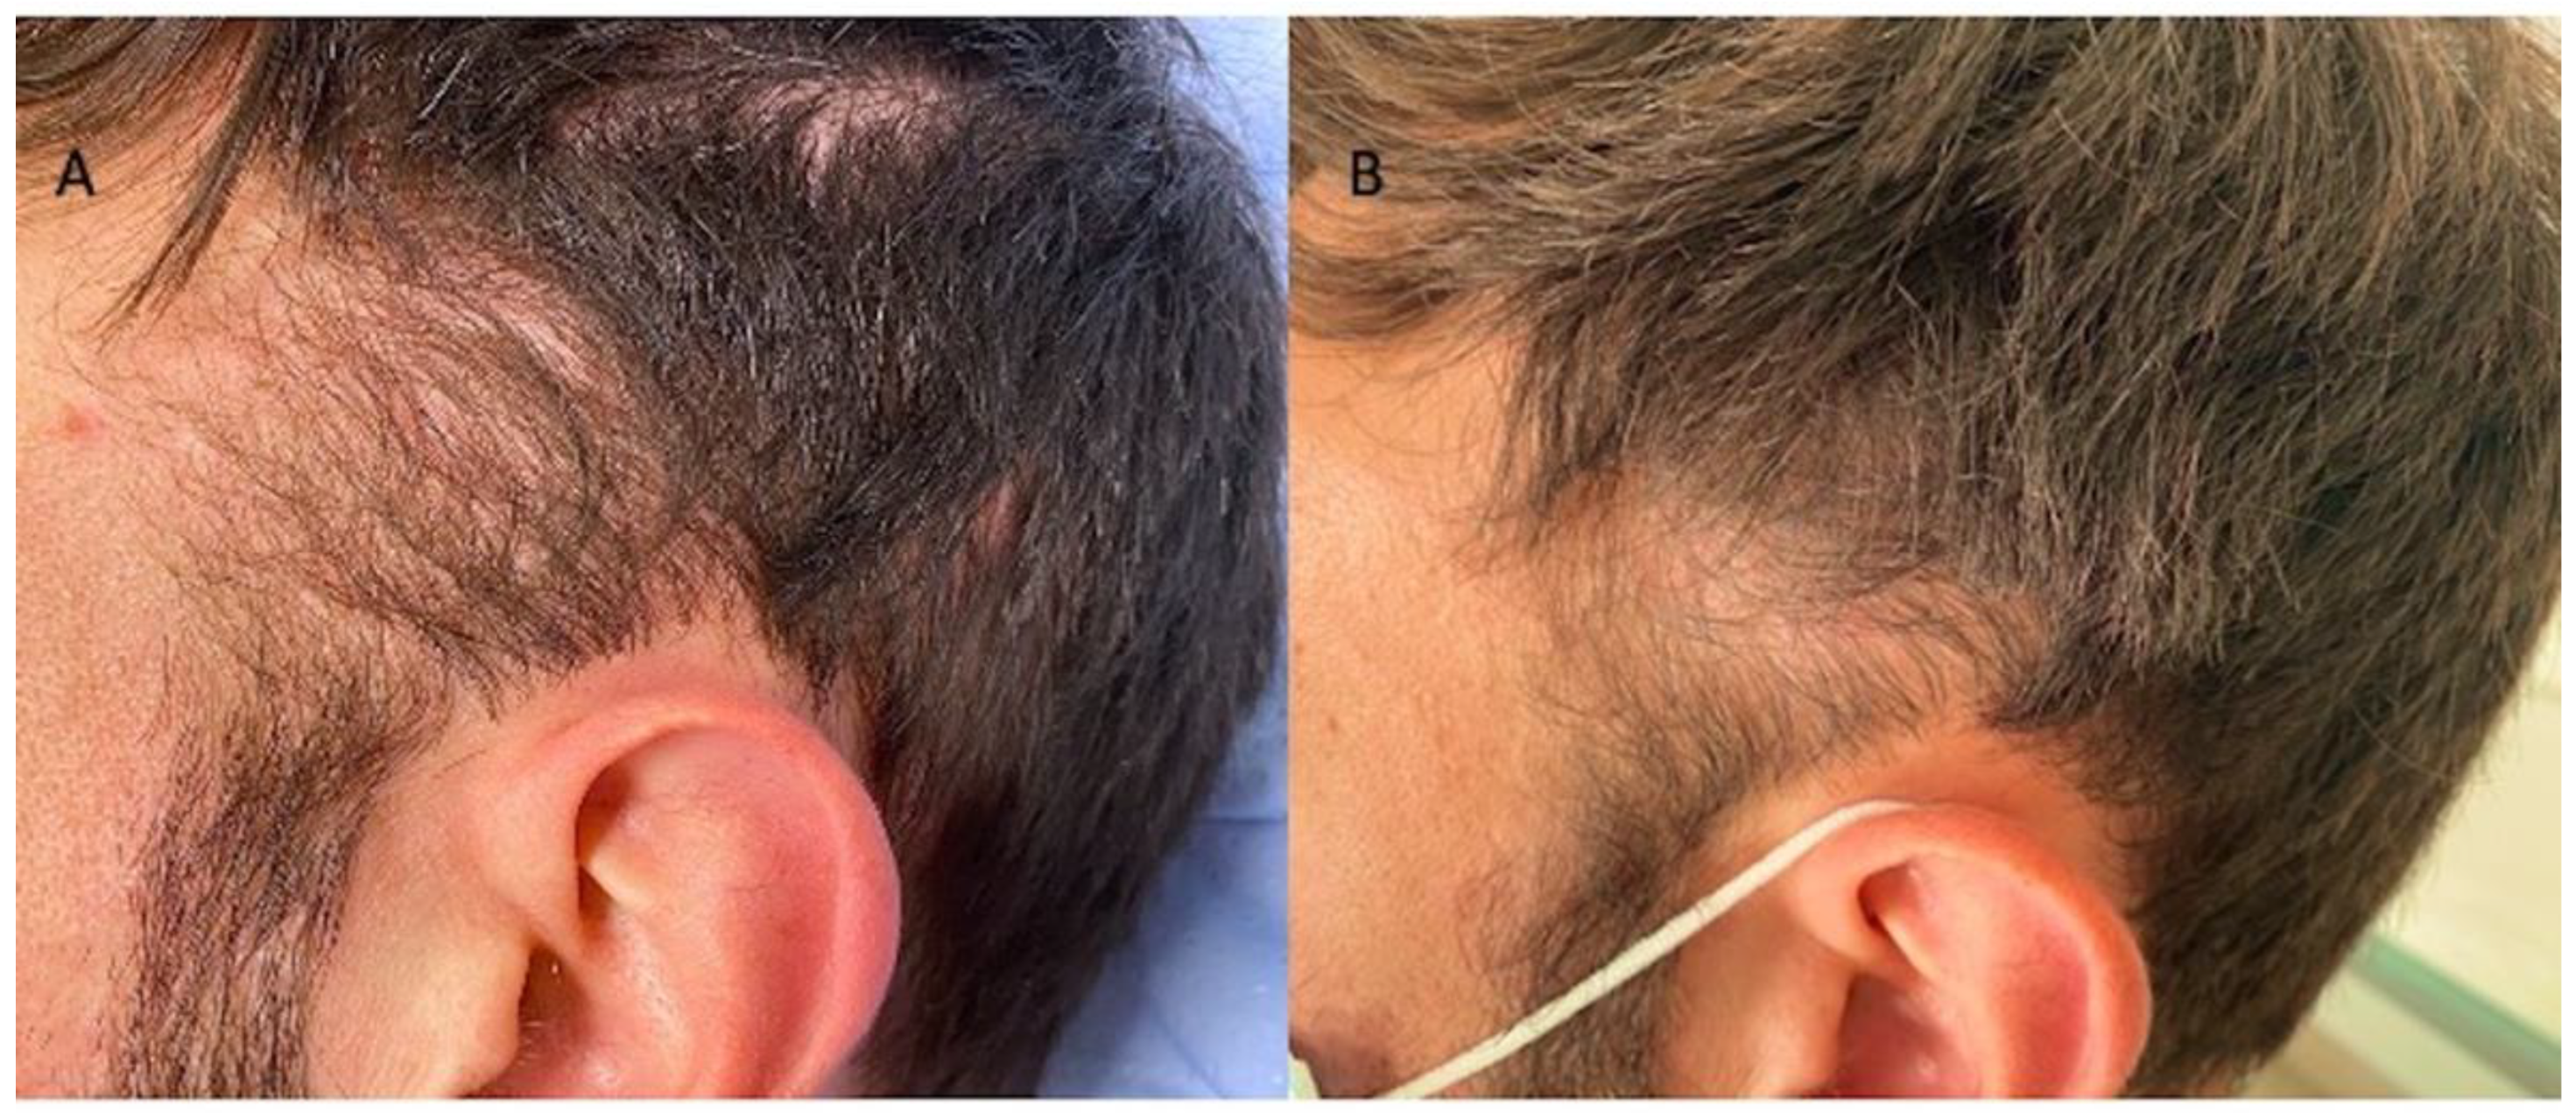 Applied Sciences | Free Full-Text | Regenerative Biotechnologies in Plastic  Surgery: A Multicentric, Retrospective, Case-Series Study on the Use of  Micro-Needling with Low-Level Light/Laser Therapy as a Hair Growth Boost in  Patients